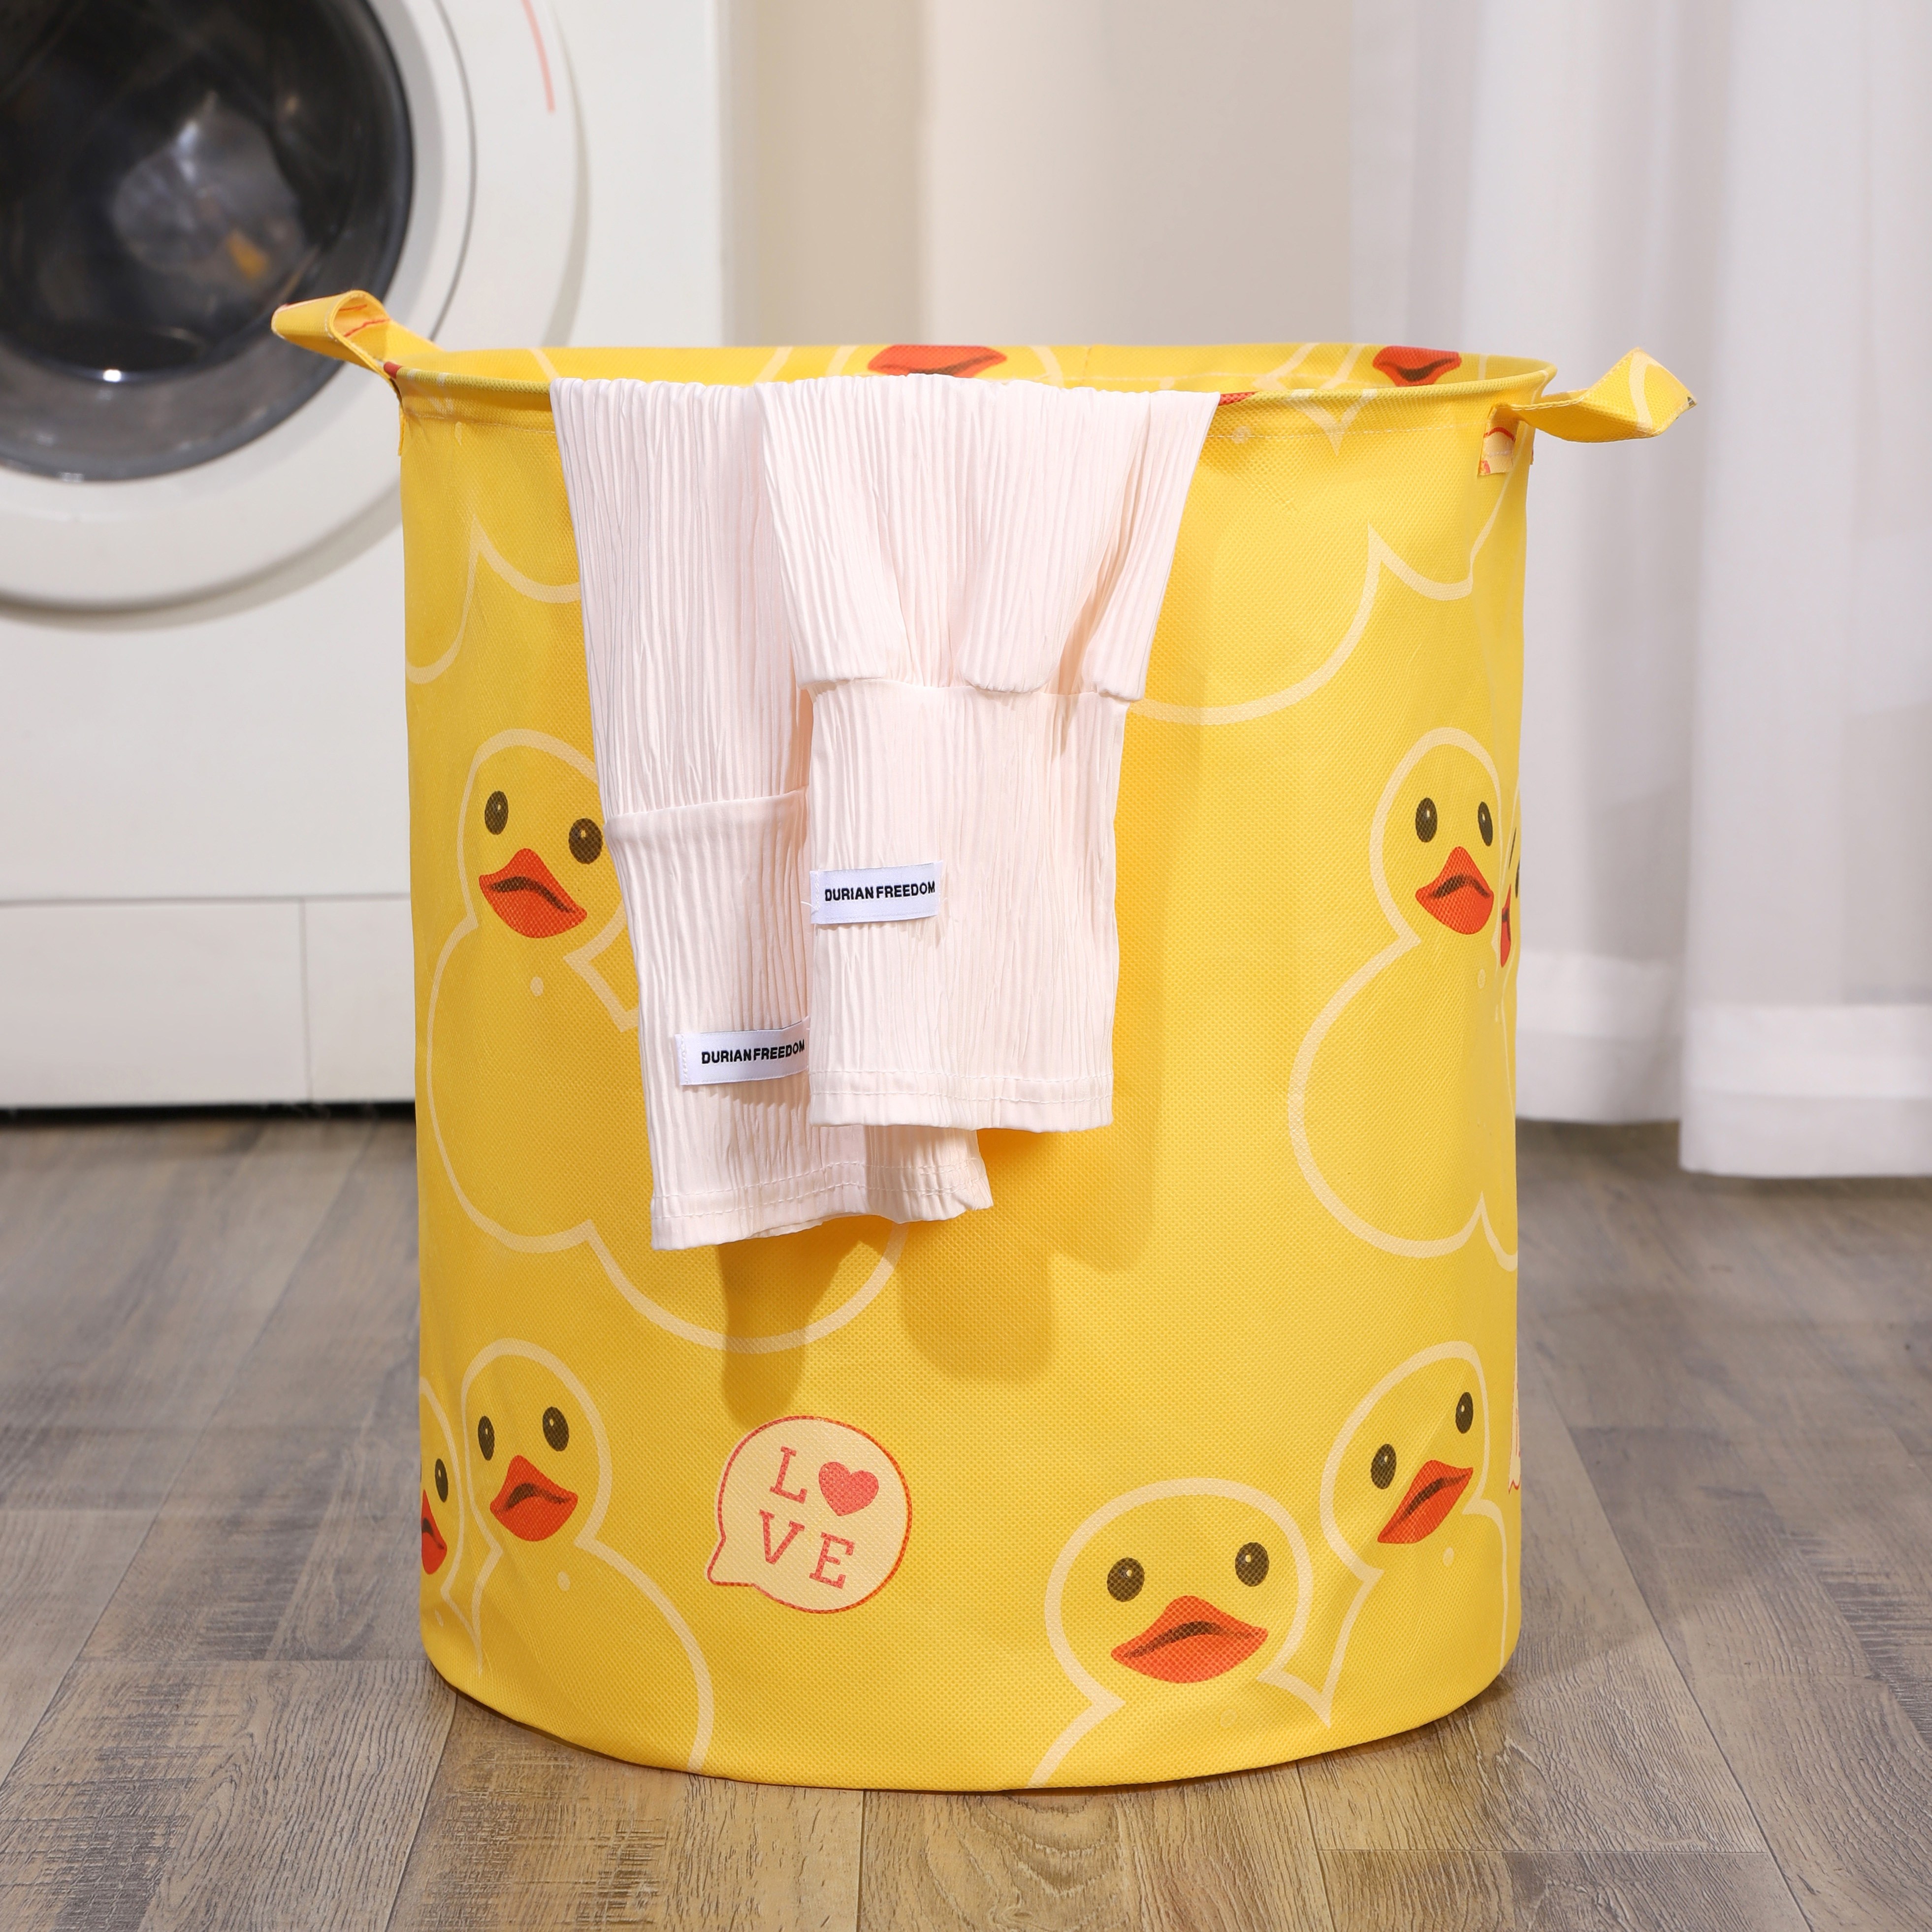 

1pcs Glam Style Waterproof Cloth Laundry Basket With Handles, Elongated Storage Organizer For Clothes, Toys, And Sundries For Bedroom